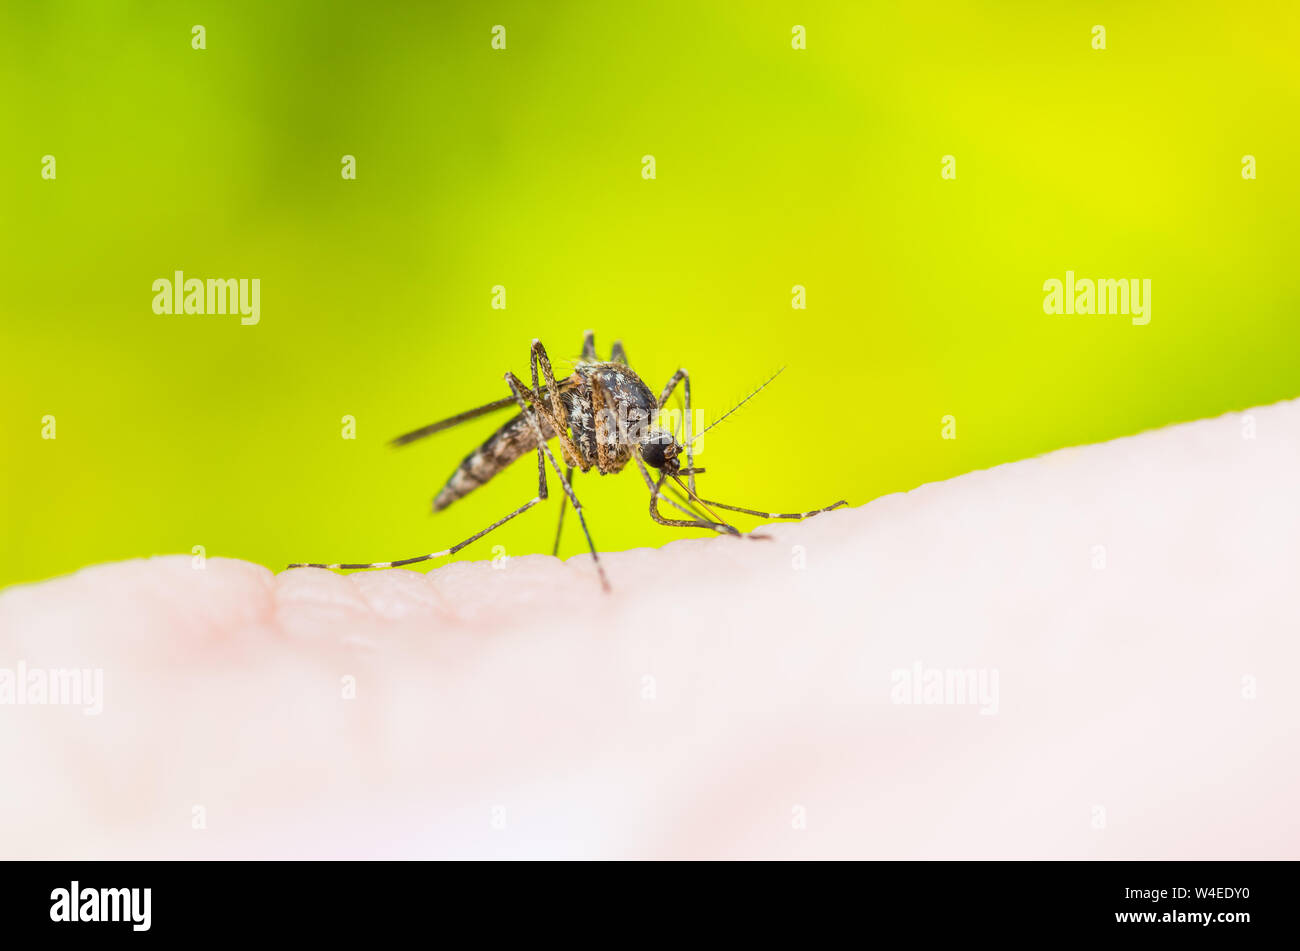 Yellow Fever, Malaria or Zika Virus Infected Mosquito Insect Macro on Yellow Background Stock Photo